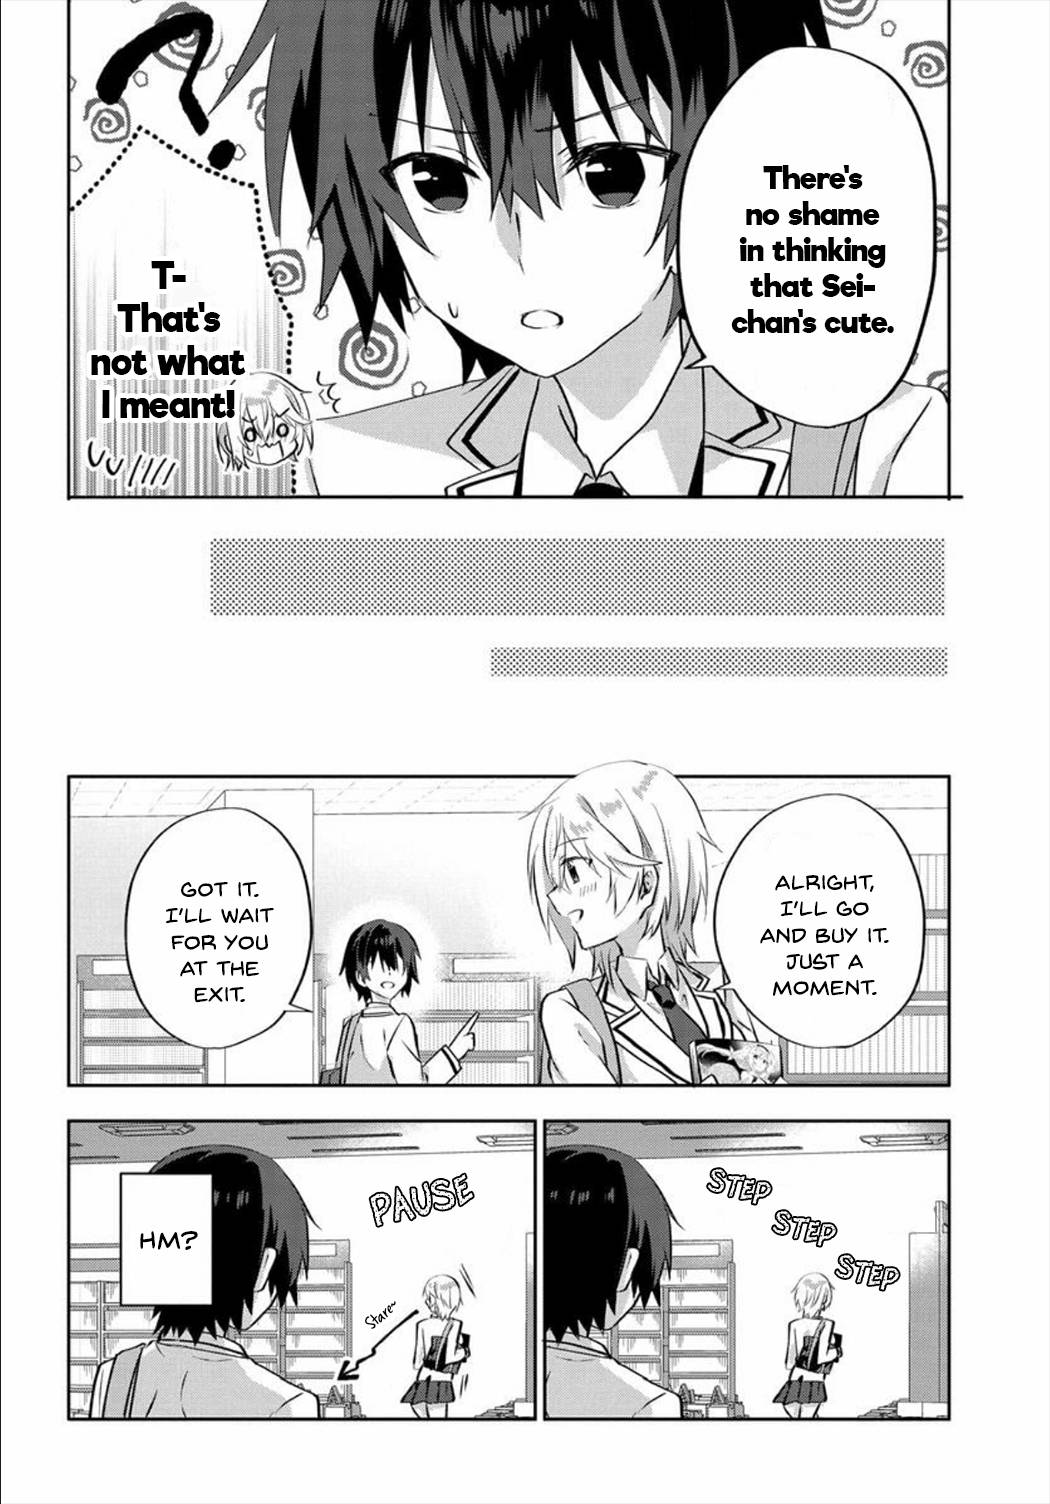 Since I’Ve Entered The World Of Romantic Comedy Manga, I’Ll Do My Best To Make The Losing Heroine Happy - chapter 5.1 - #6